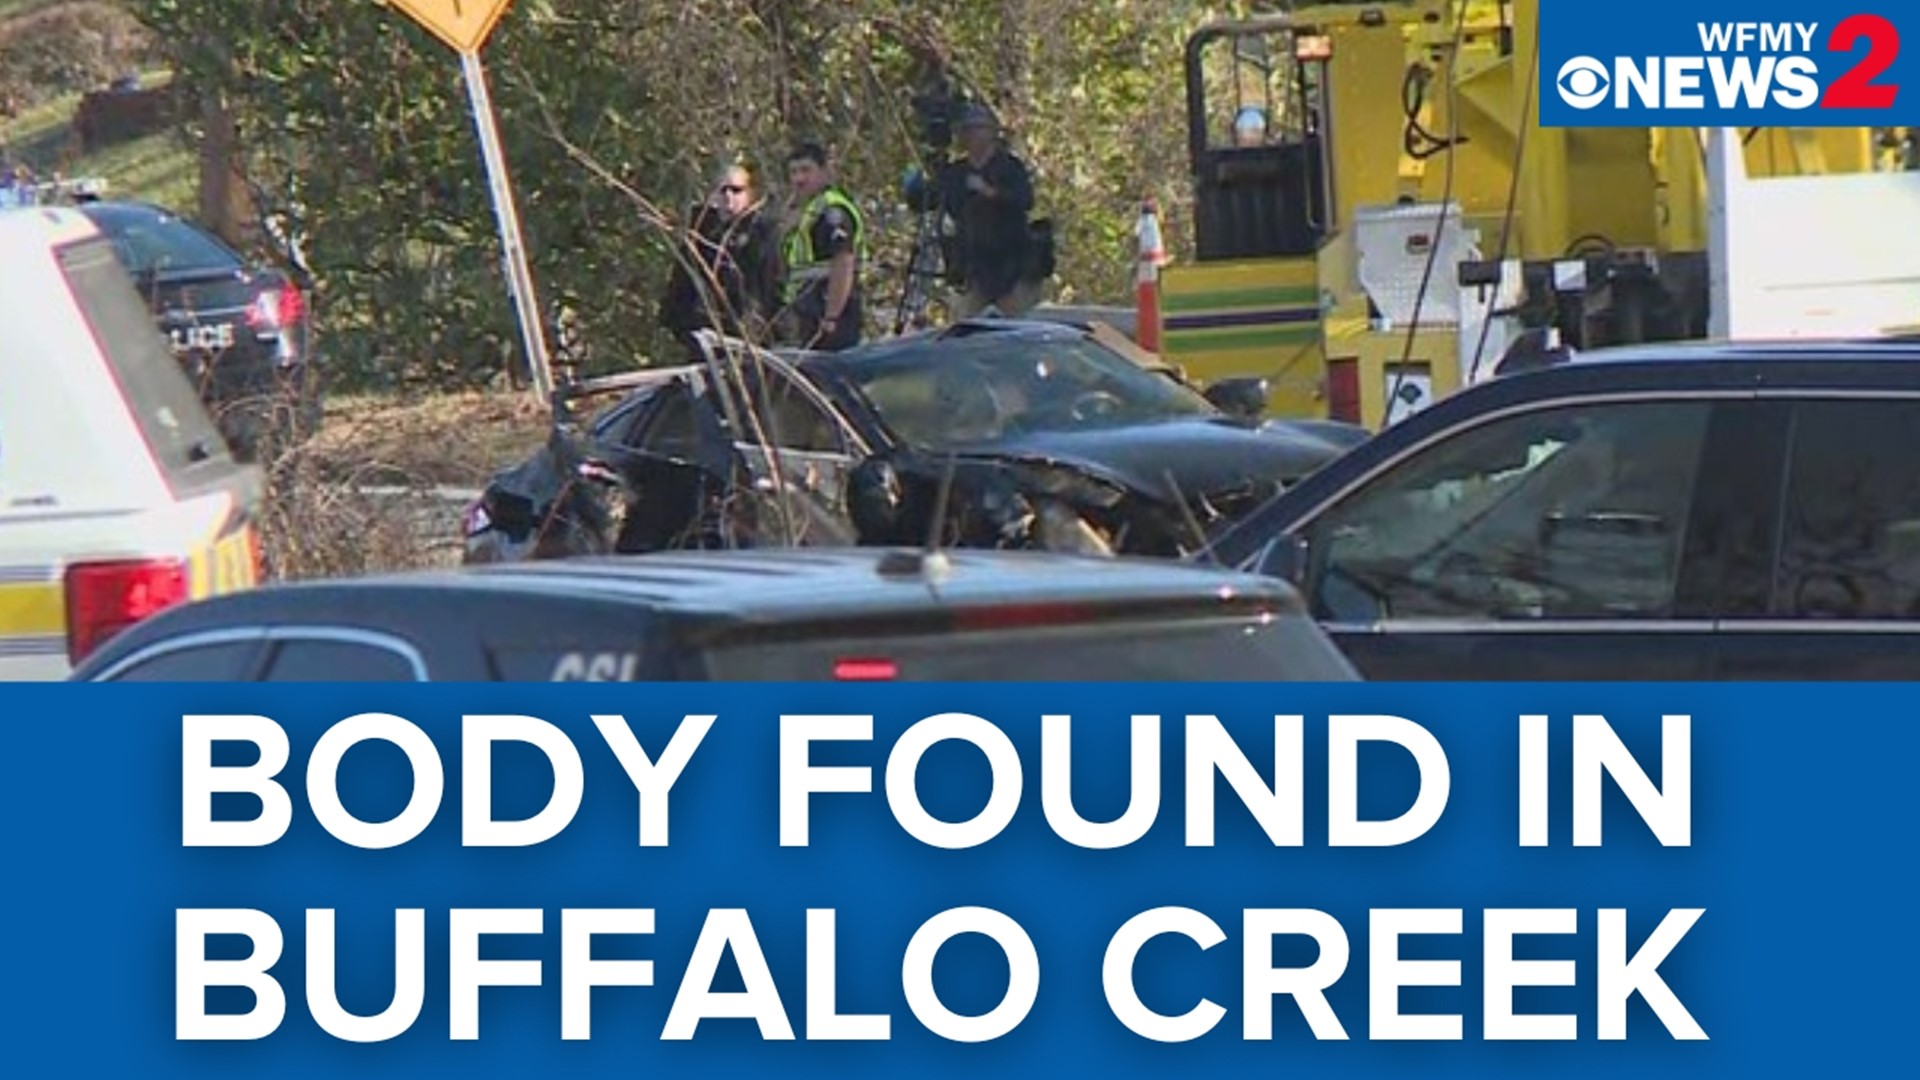 Greensboro police said they found a body in a car that was located in a creek off Holden Road and Wendover Avenue.